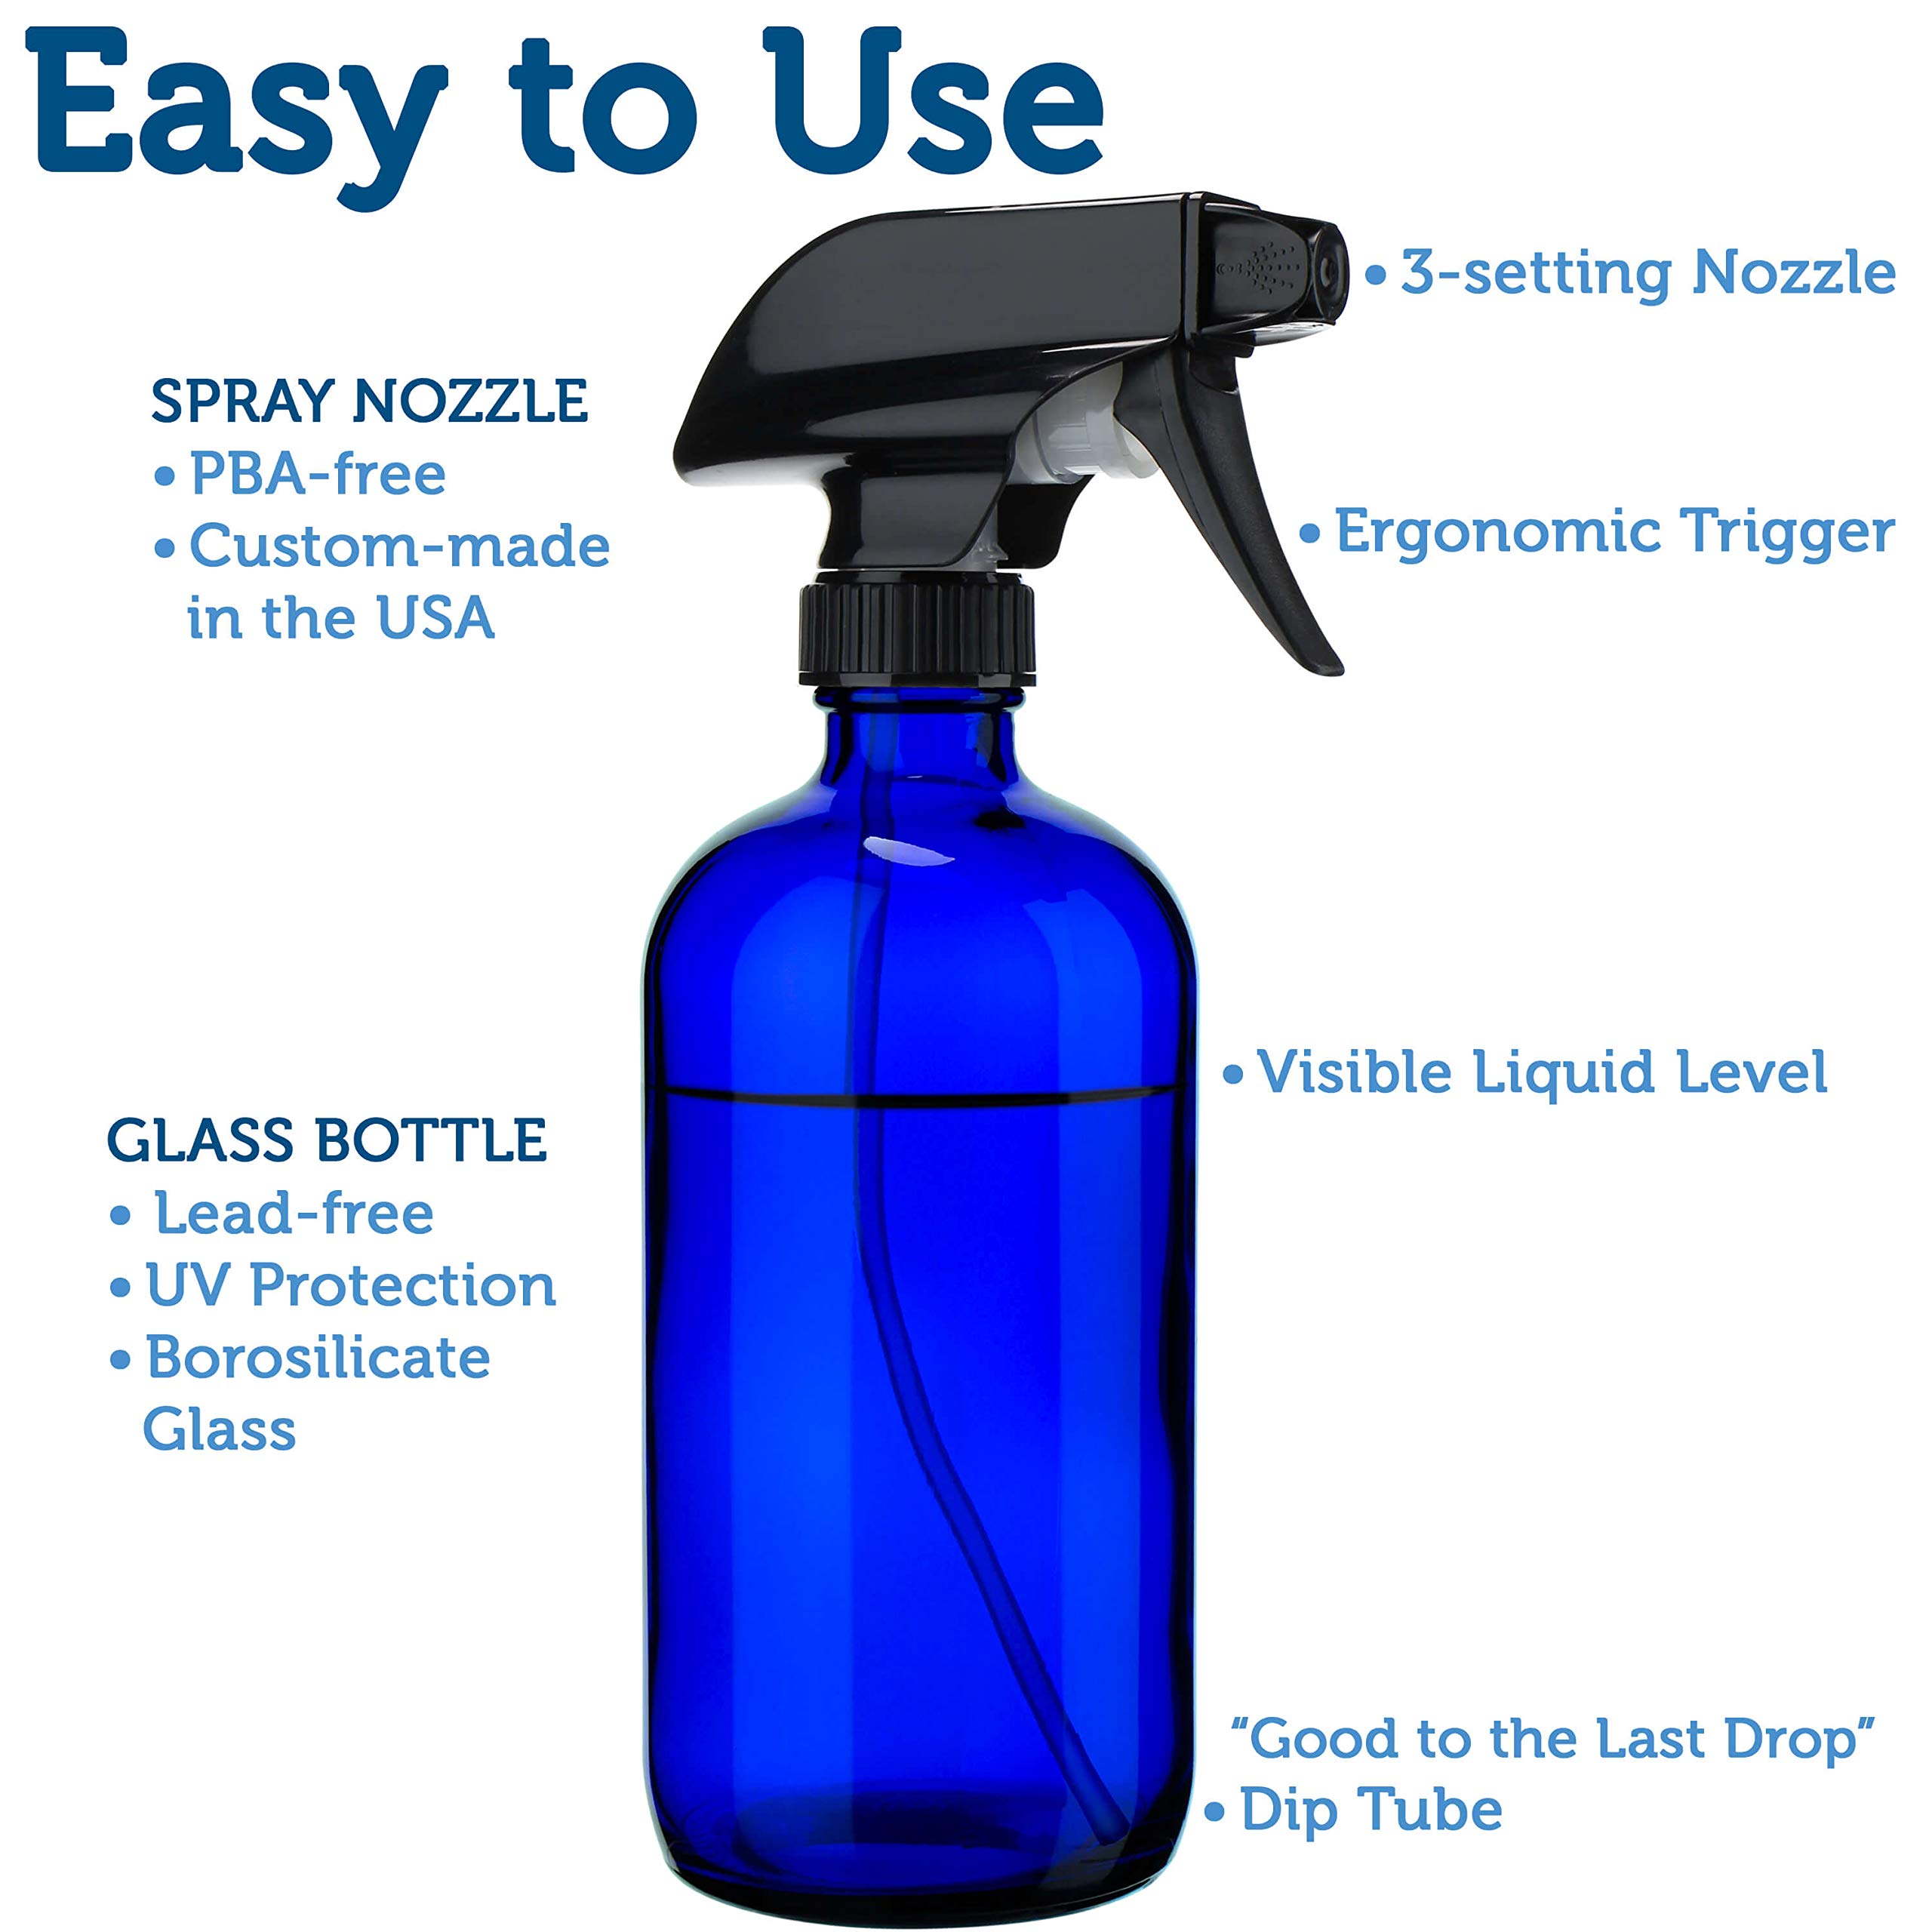 Empty Blue Glass Spray Bottles (2 Pack) - BPA Free - Large 16 oz Refillable Bottle for Plants, Pets, Essential Oils, Cleaning Products - Black Trigger Sprayer w/Mist and Stream Settings